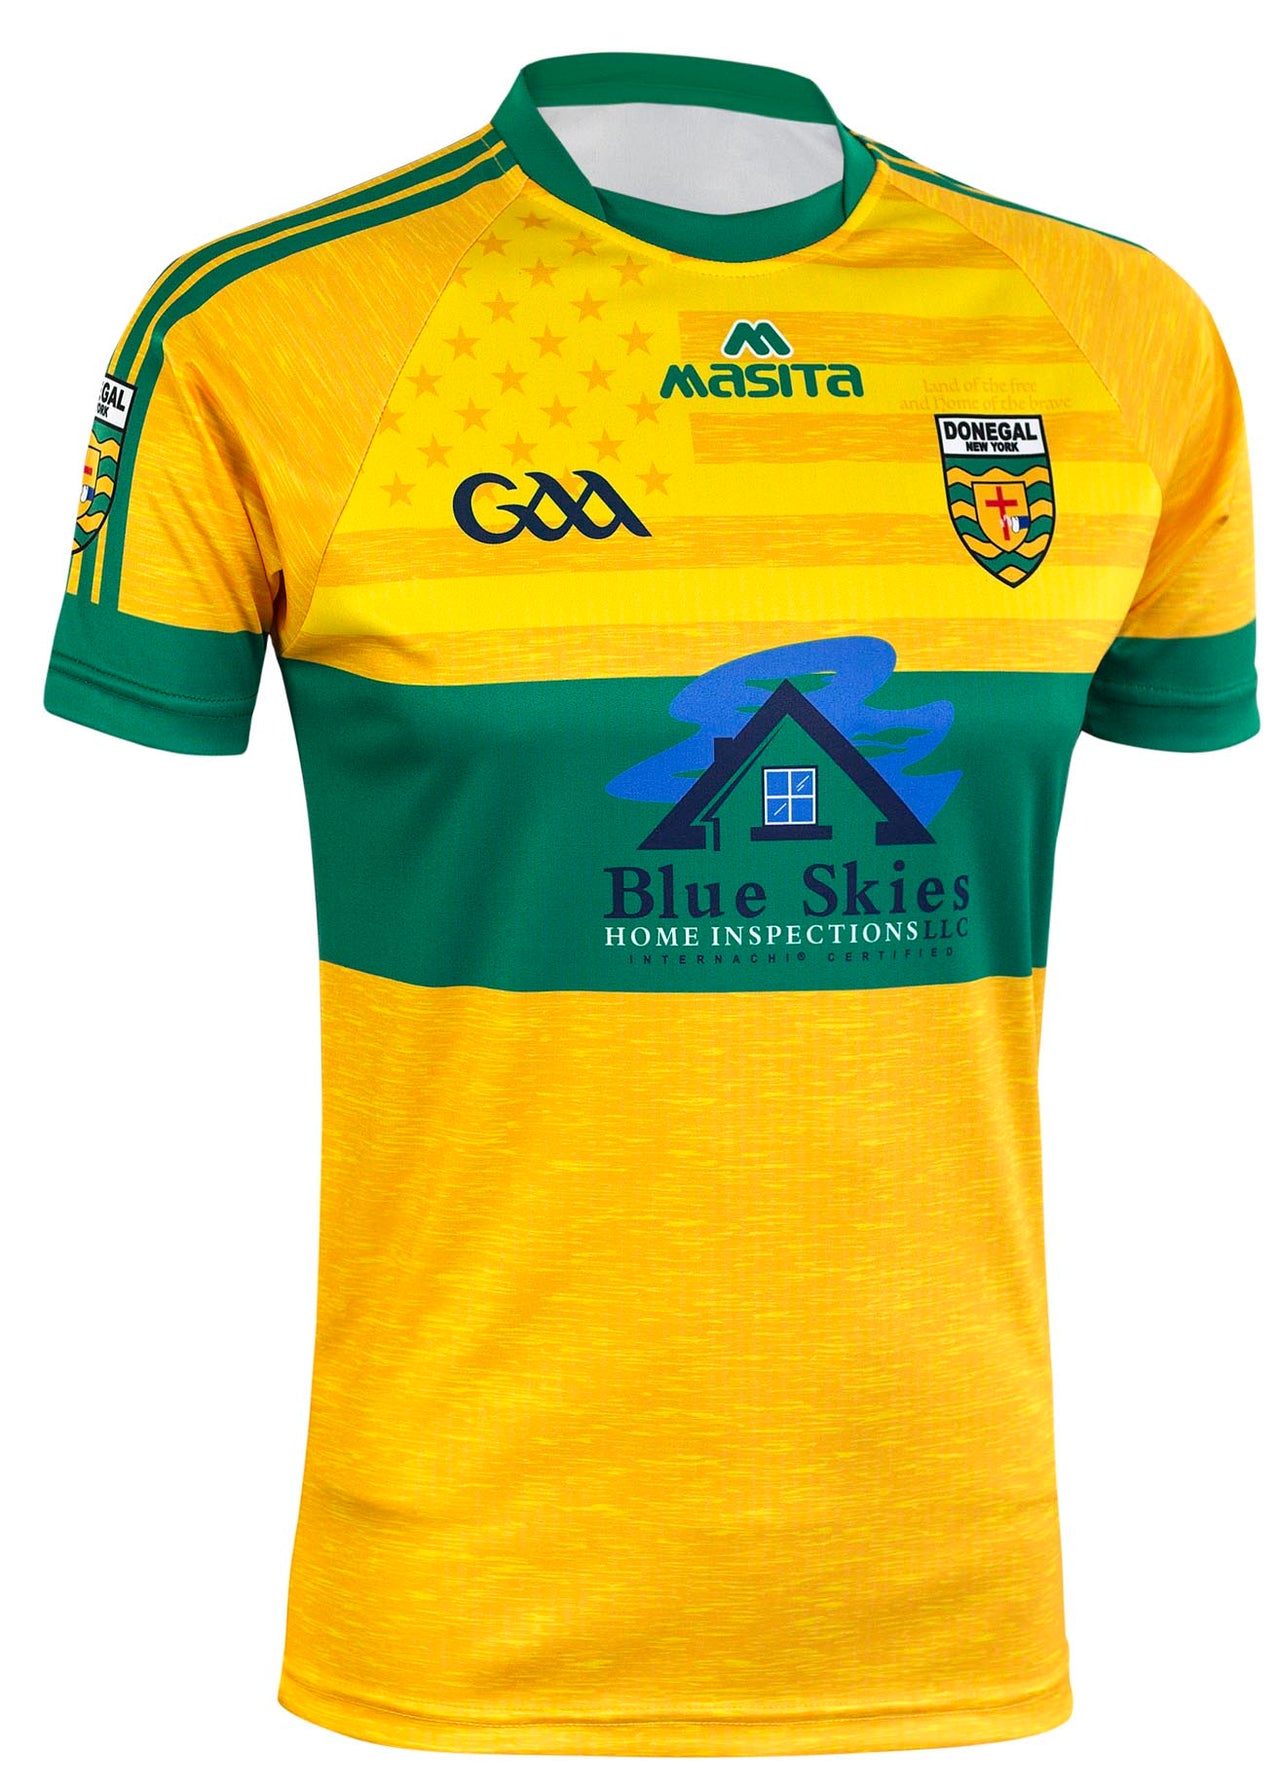 Donegal New York Goalkeeper Jersey Player Fit Adult